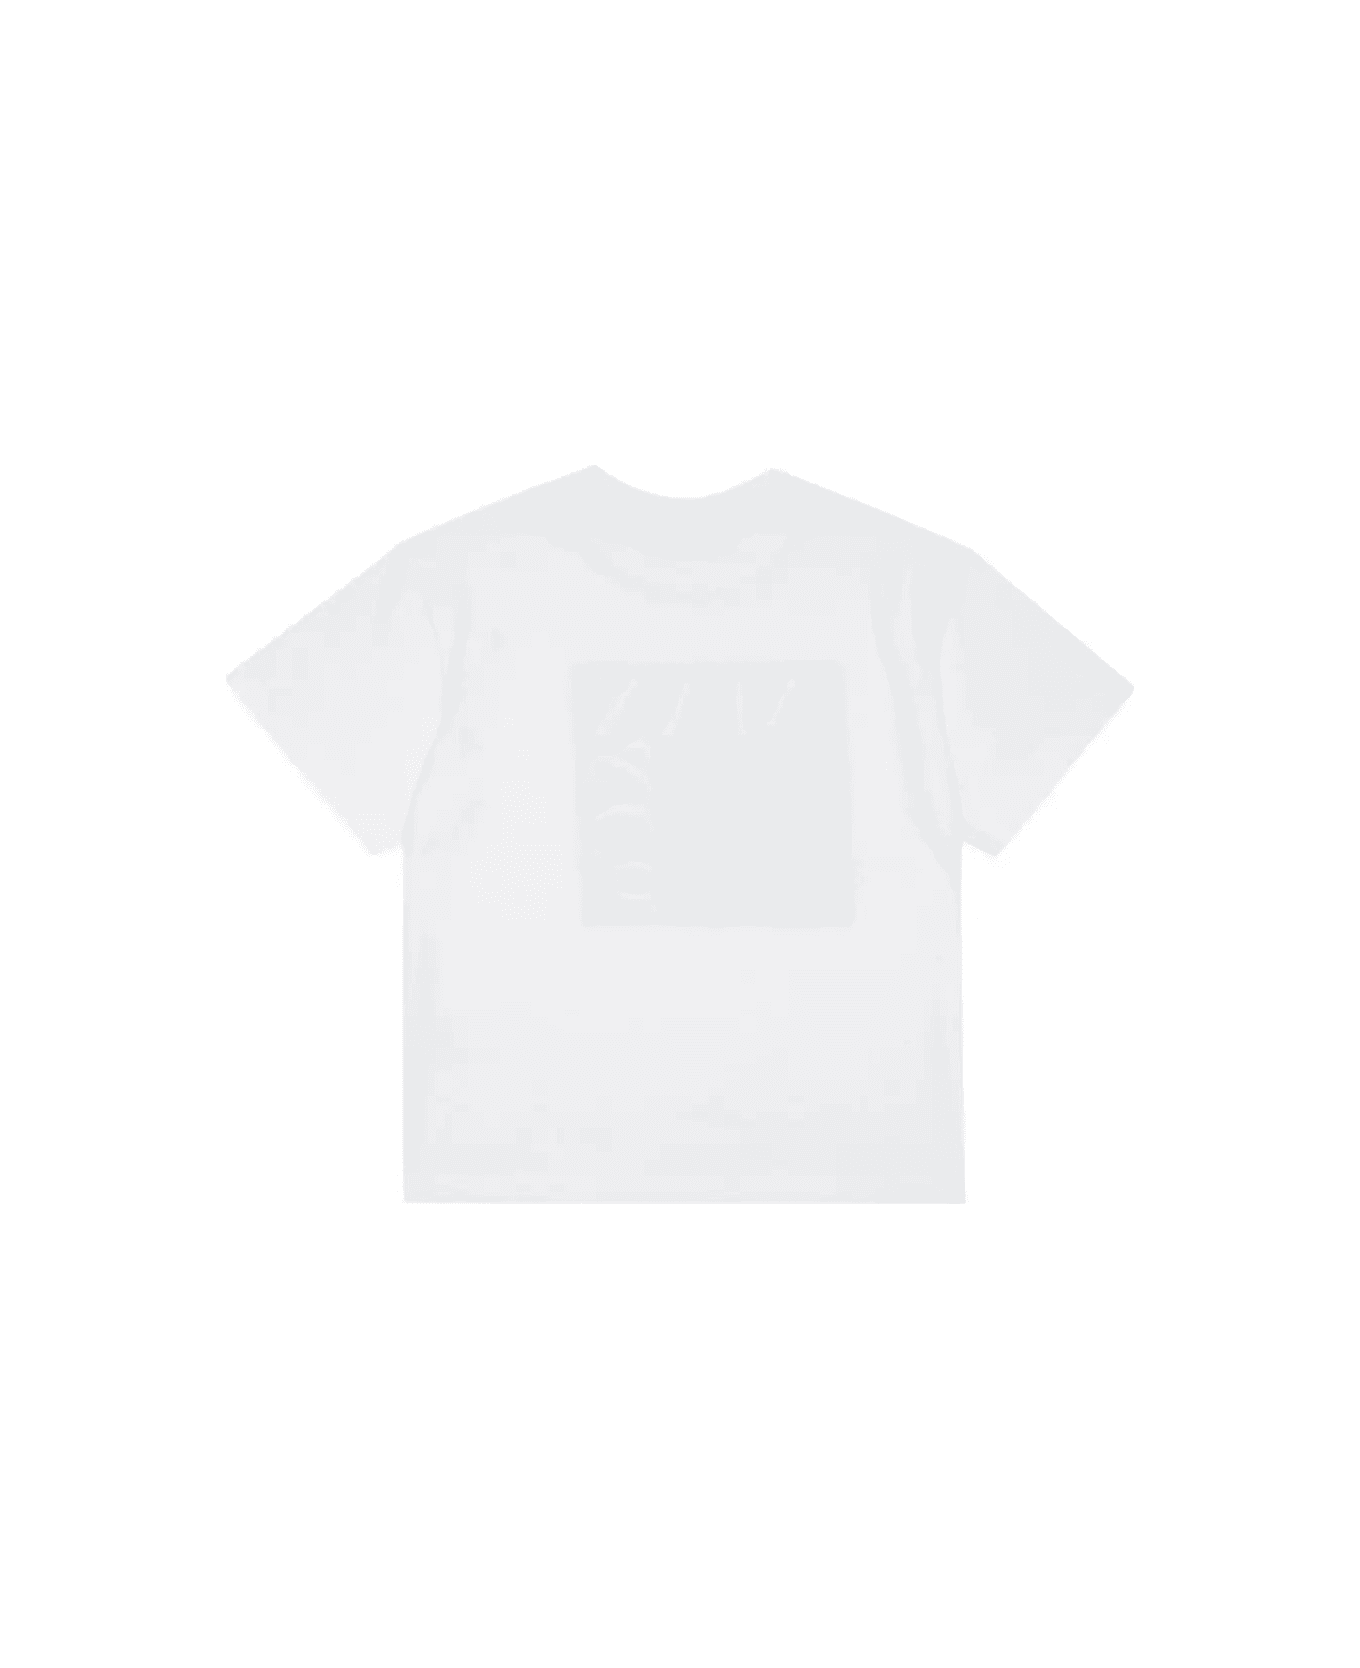 Max&Co. Icona T-shirt With Logo In White And Blue - White